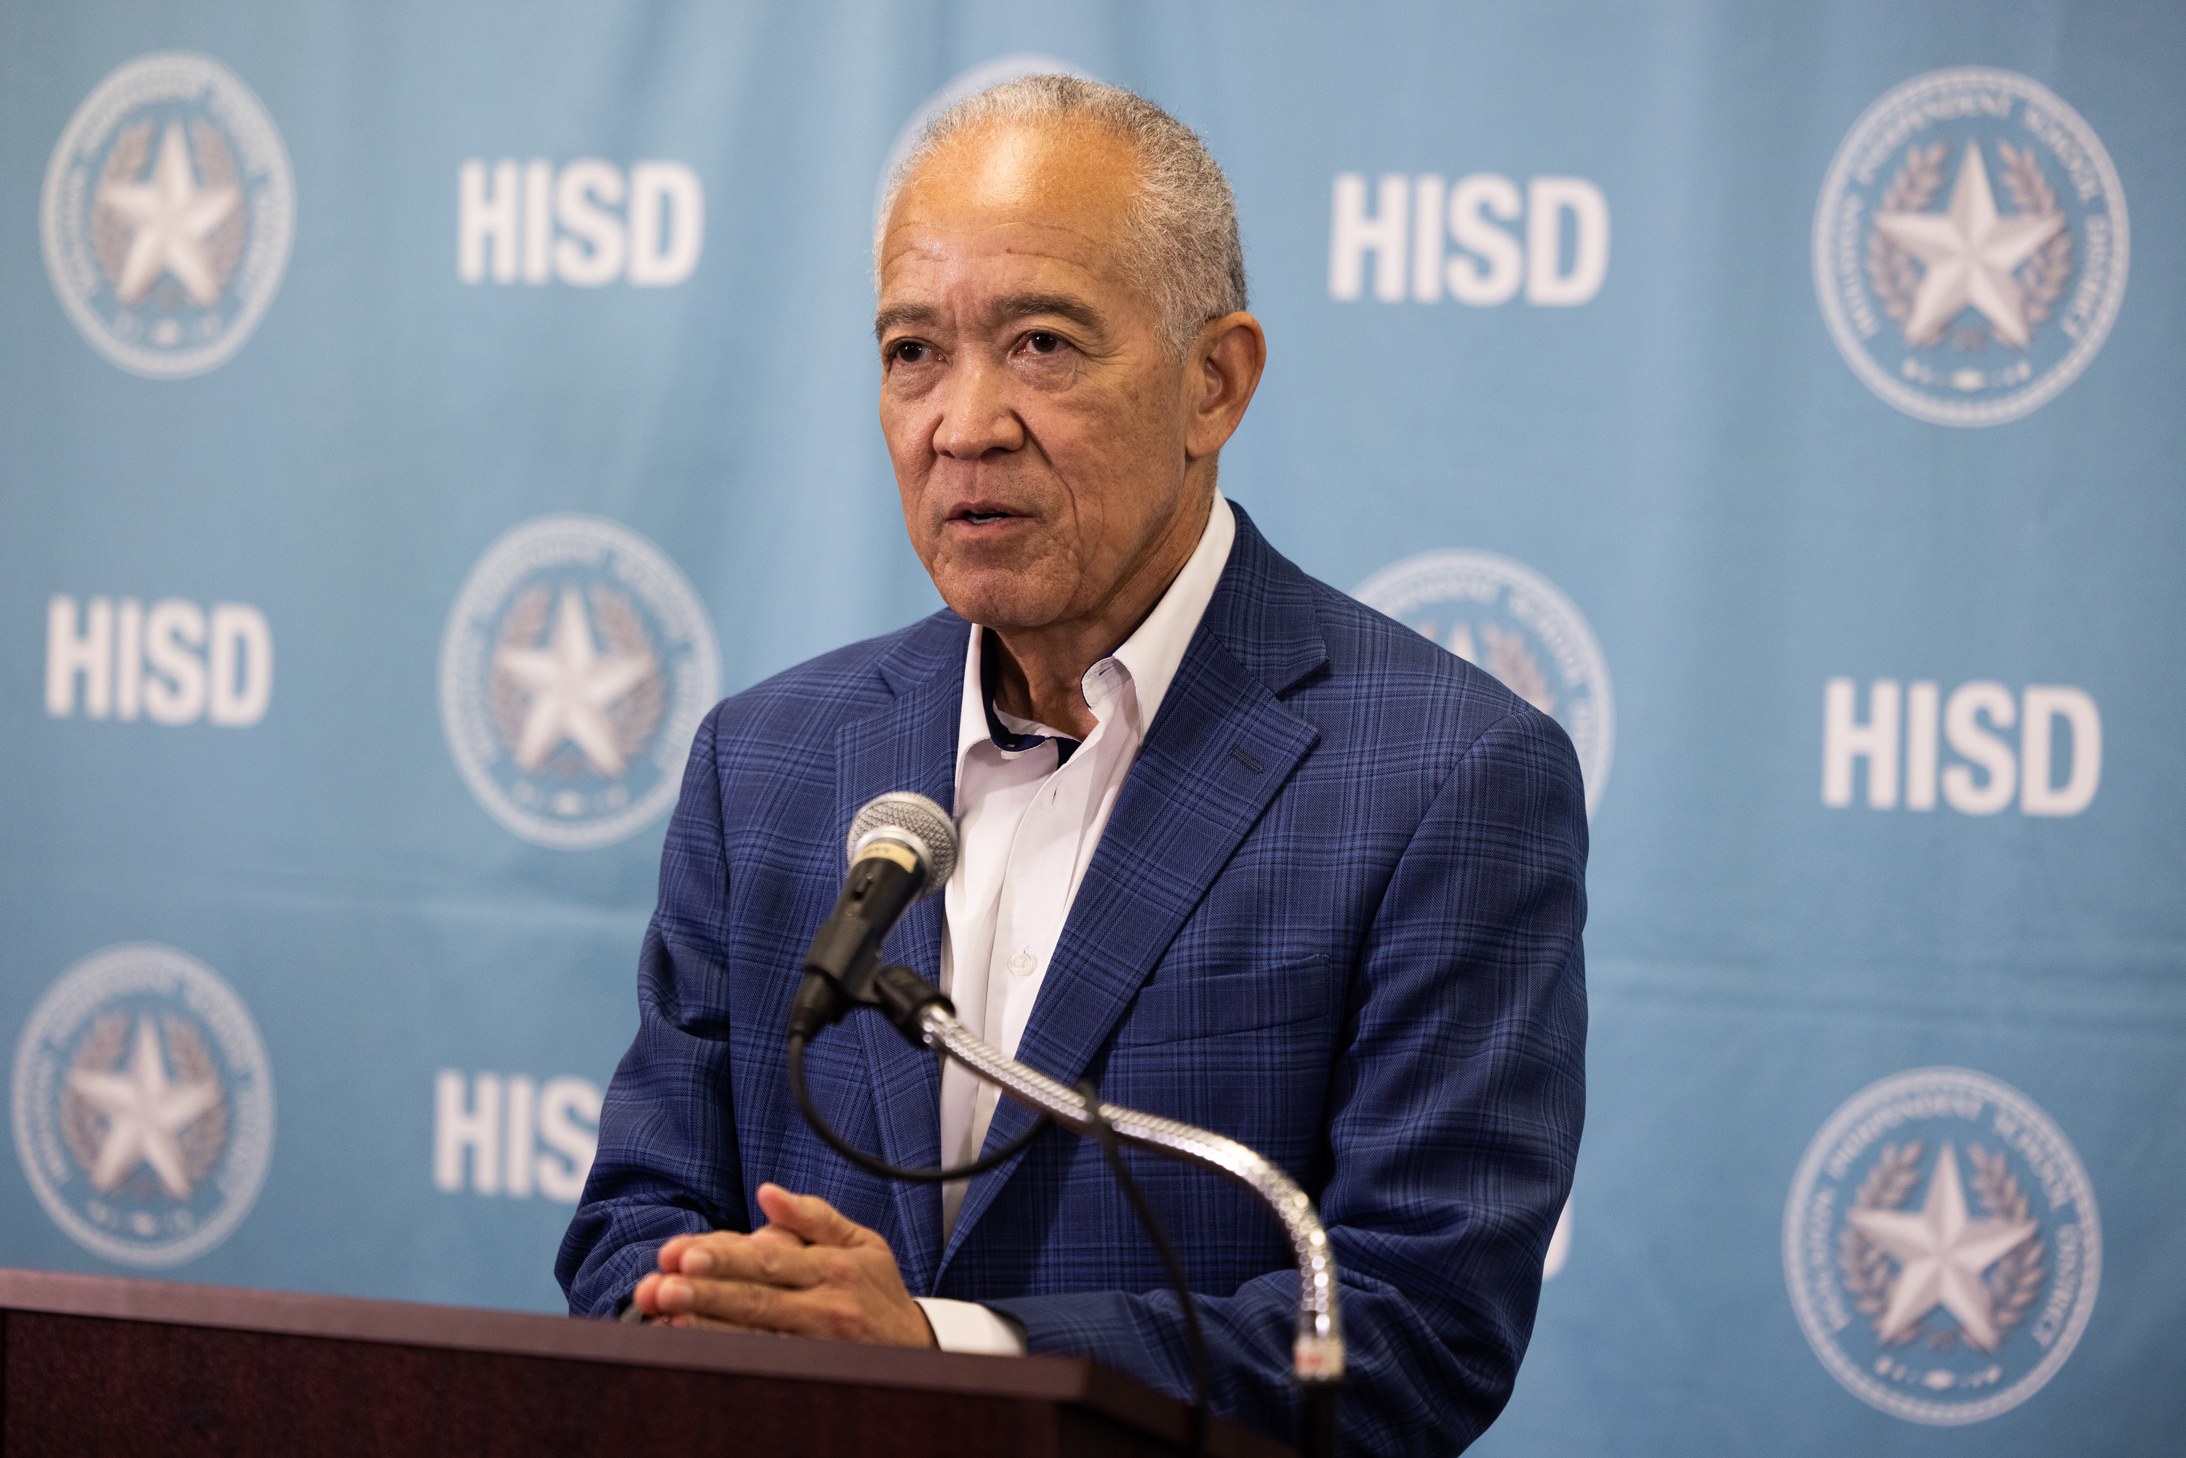 HISD Superintendent Mike Miles